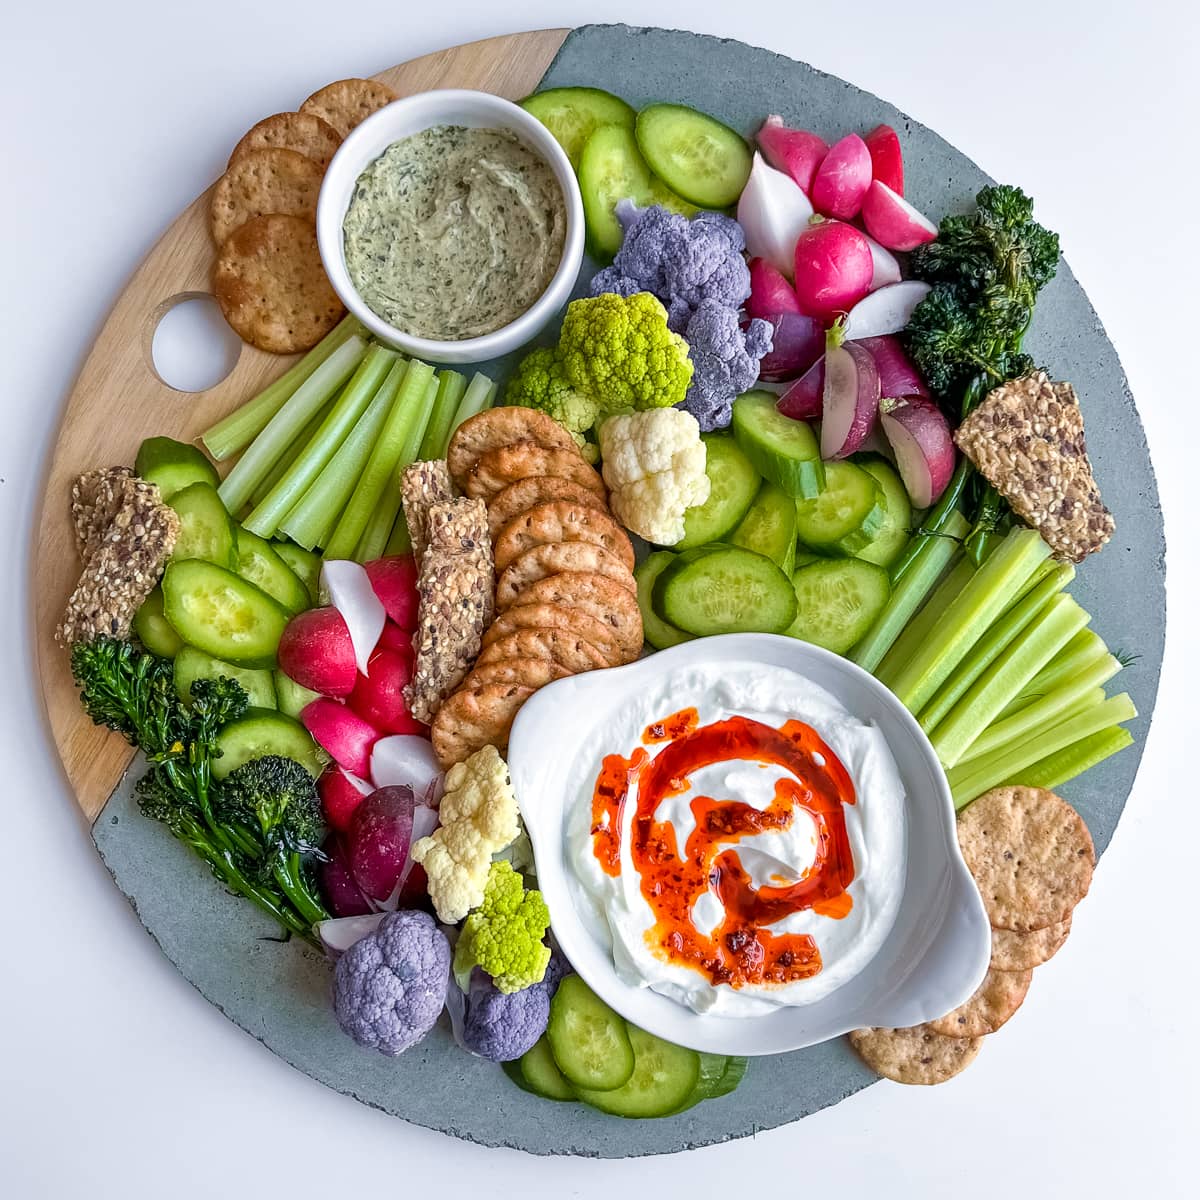 Assorted colorful crudite with dip